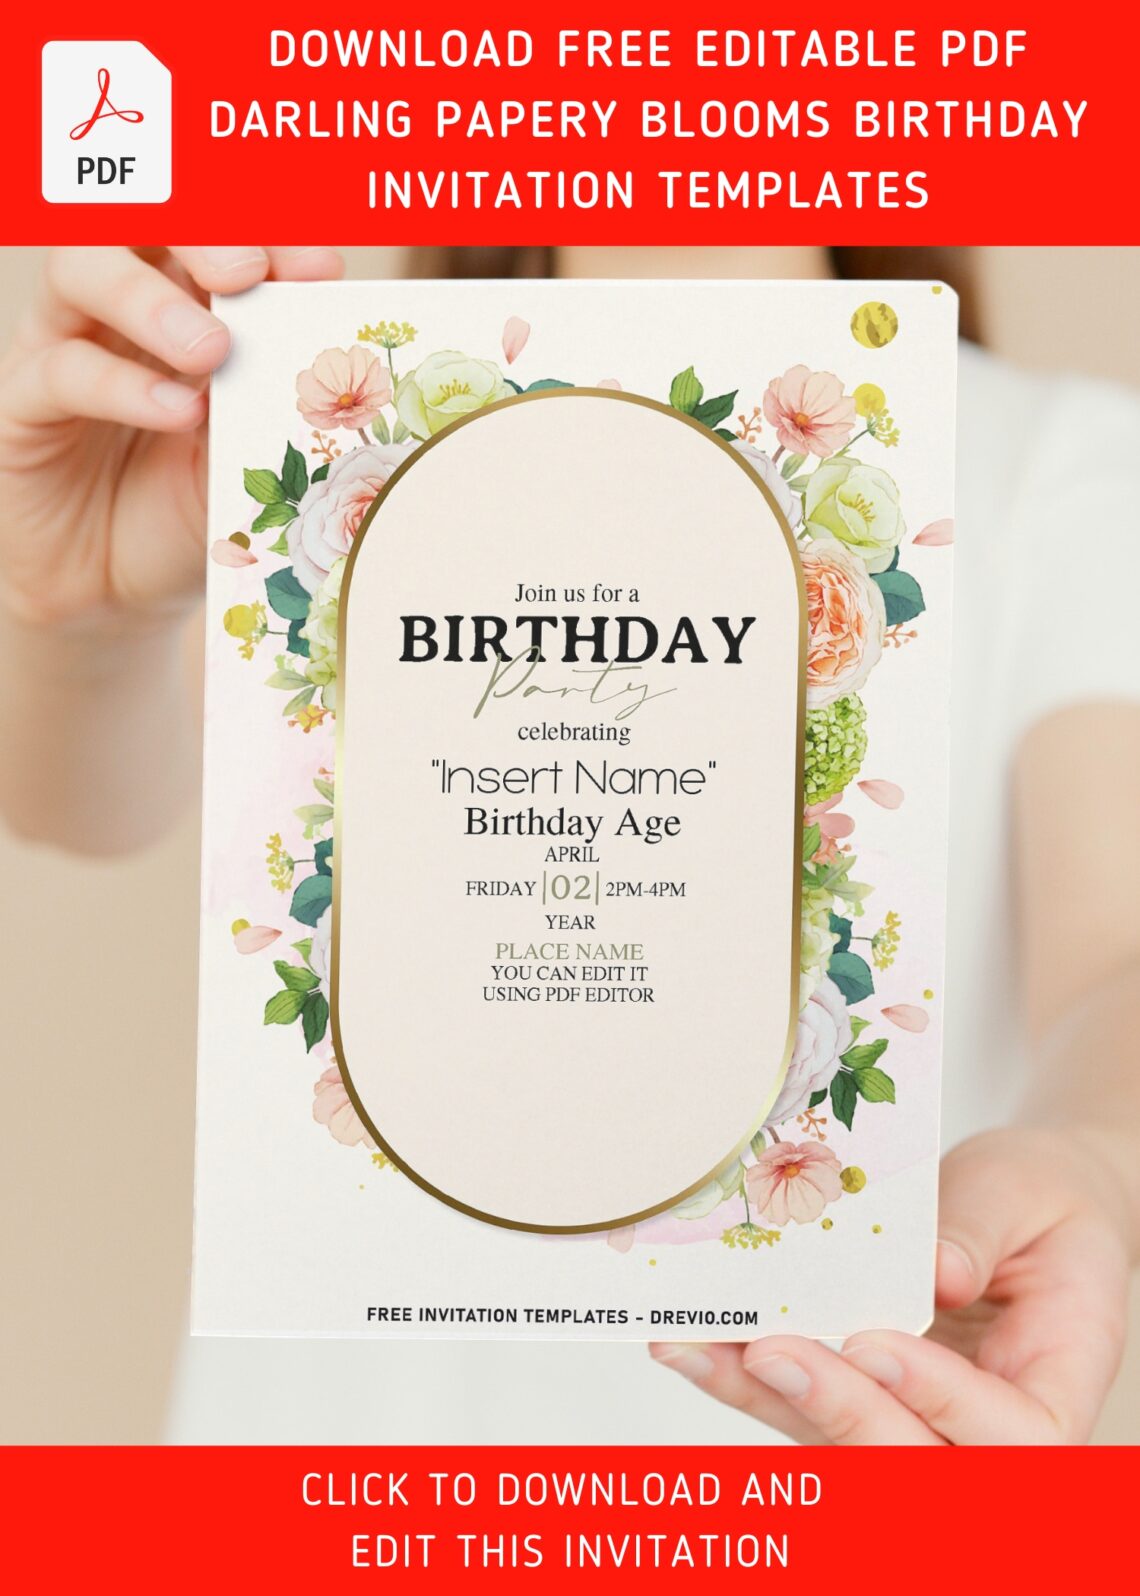 (Free Editable PDF) Darling Papery Blooms Birthday Invitation Templates with editable text